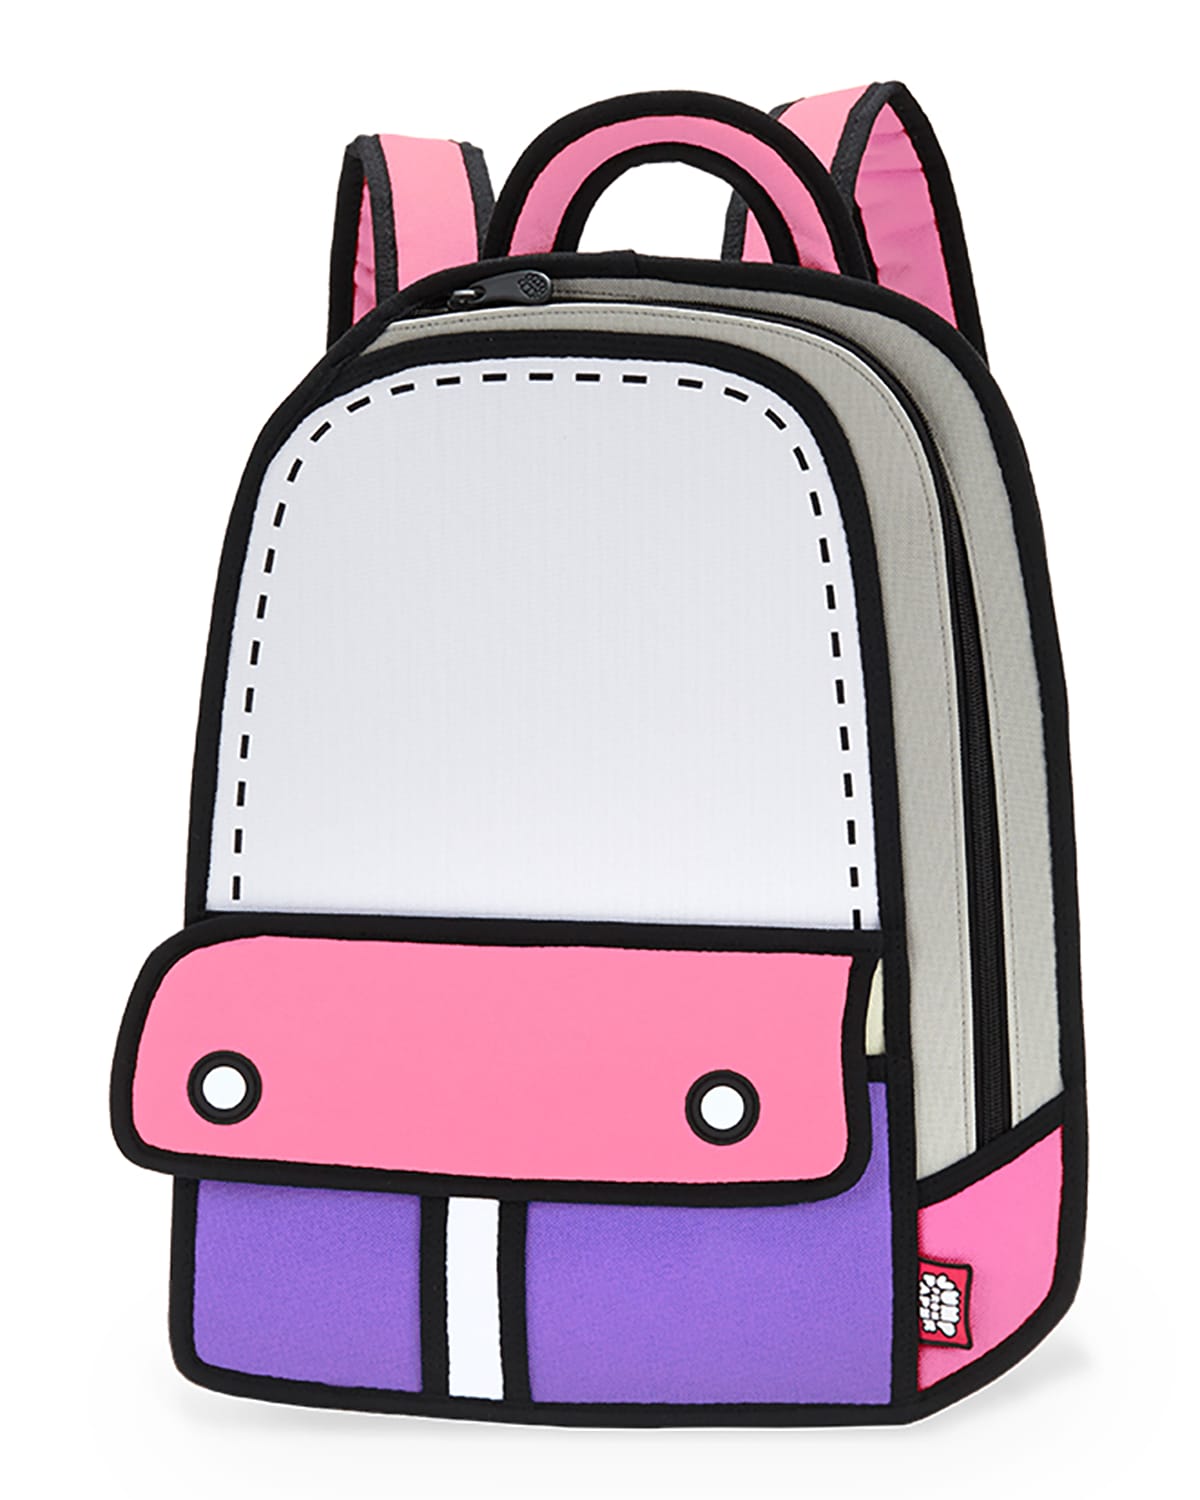 Jump from Paper Kid's Adventure Backpack